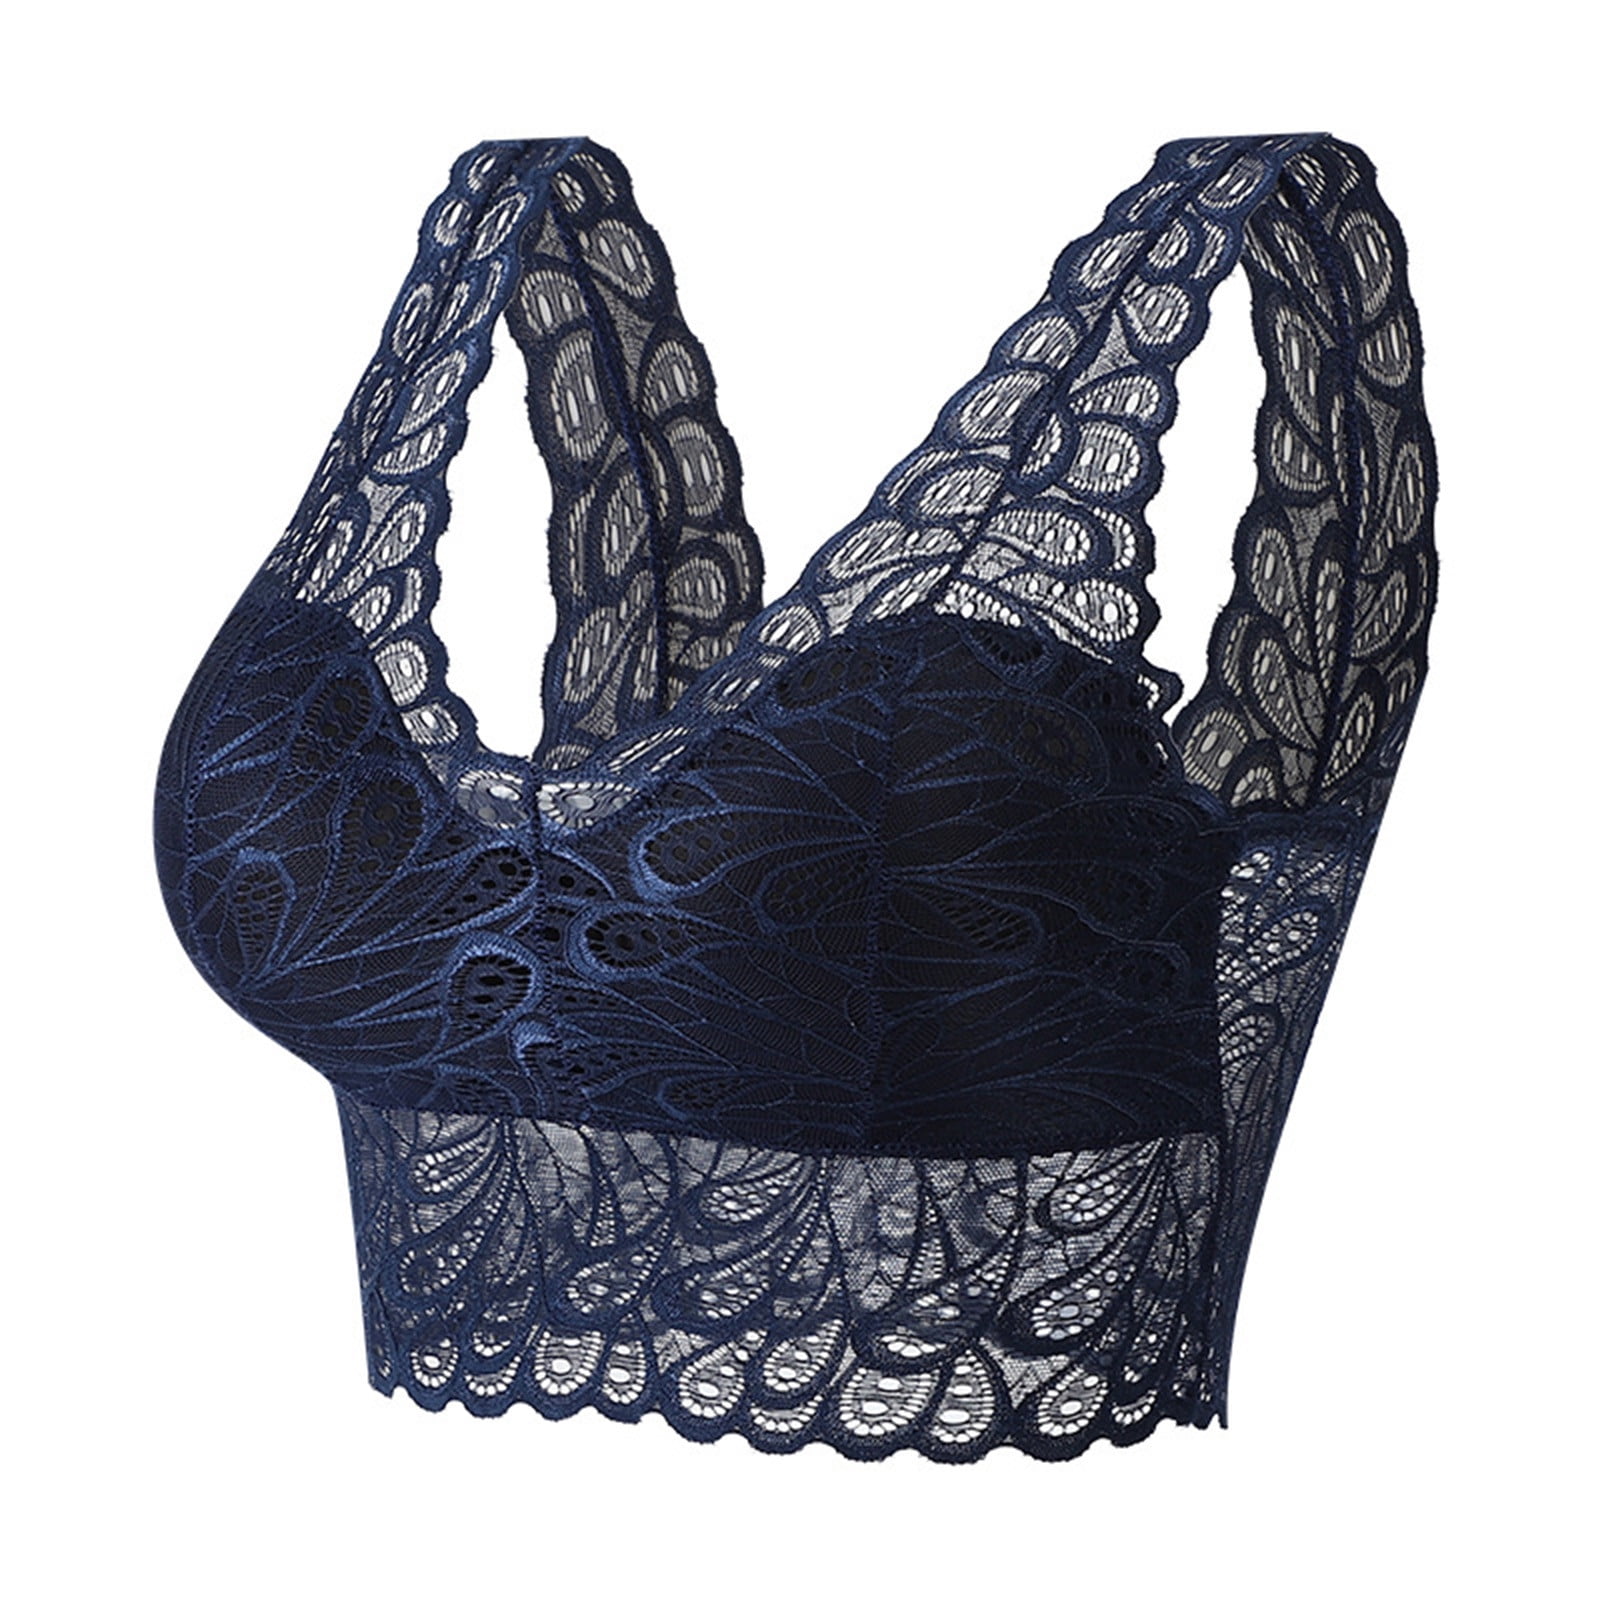 New Cross Back Spider Bras with Clasp - One Sexy Biker Chick Store